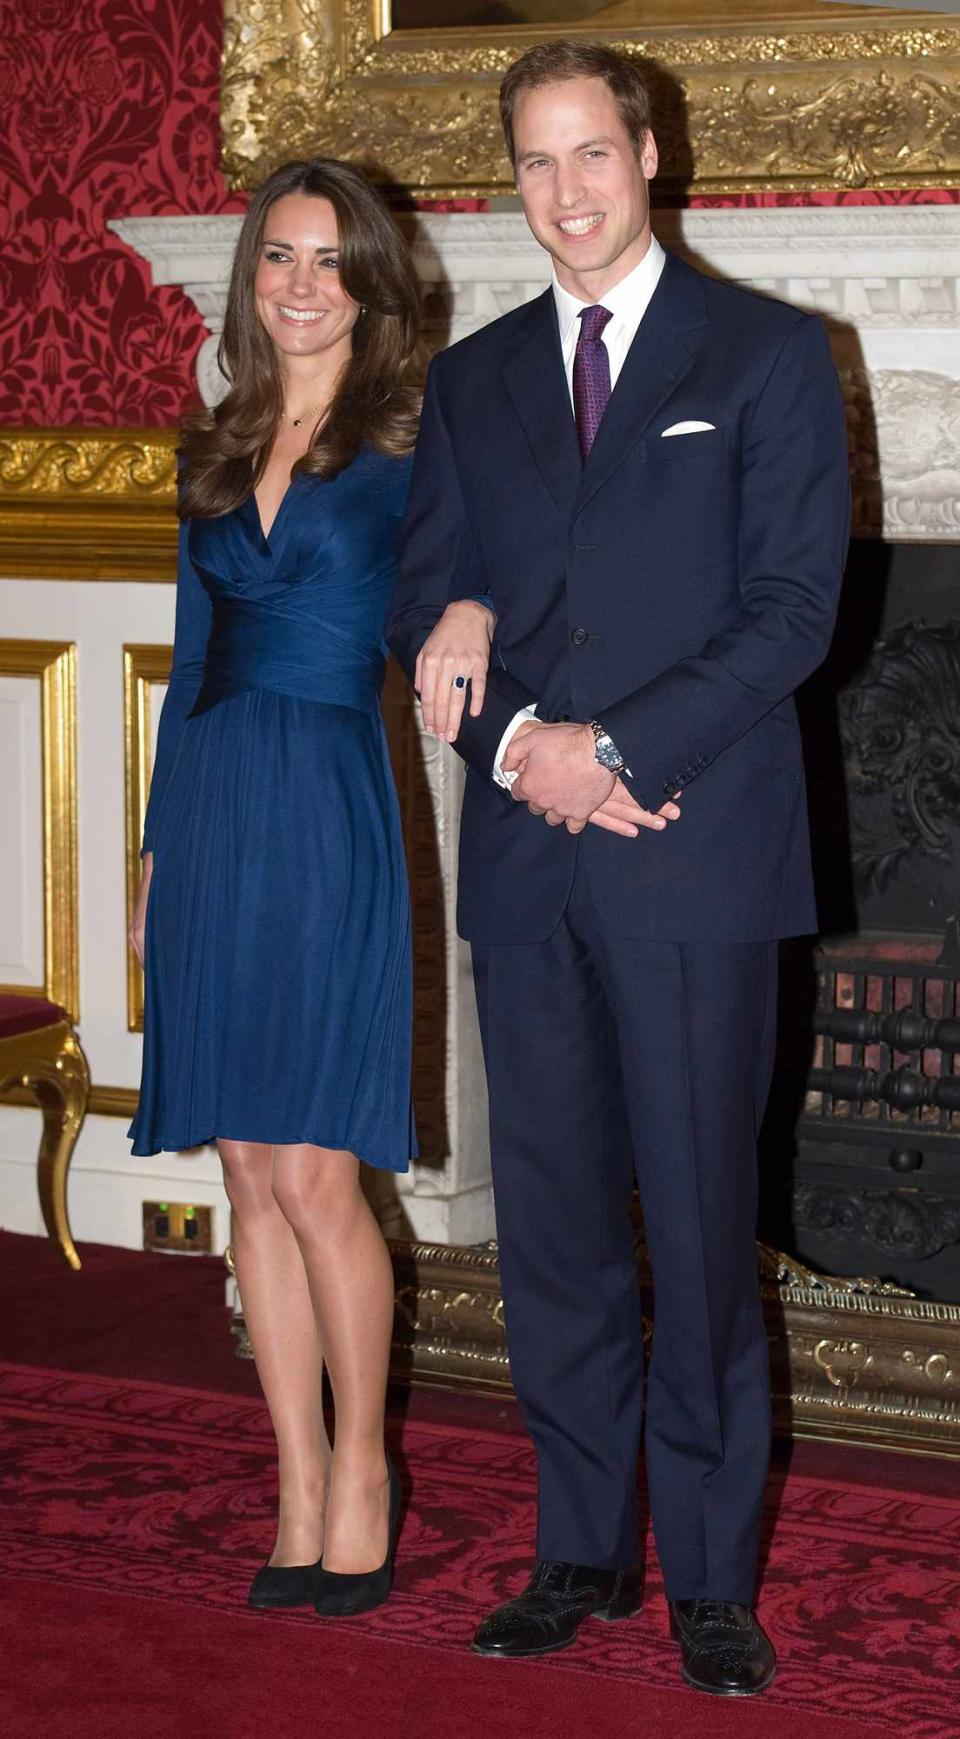 Prince William and Kate Middleton officially announce their engagement at St James's Palace on November 16, 2010 in London, England